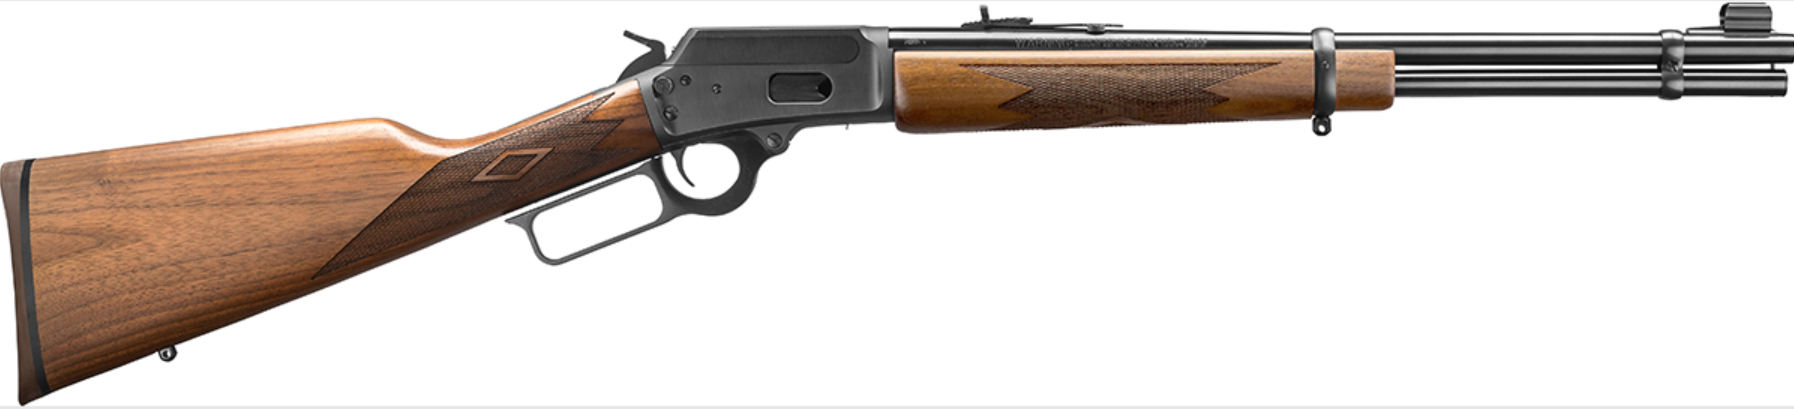 Review of the Ruger-Built Marlin 1894 .44 Magnun